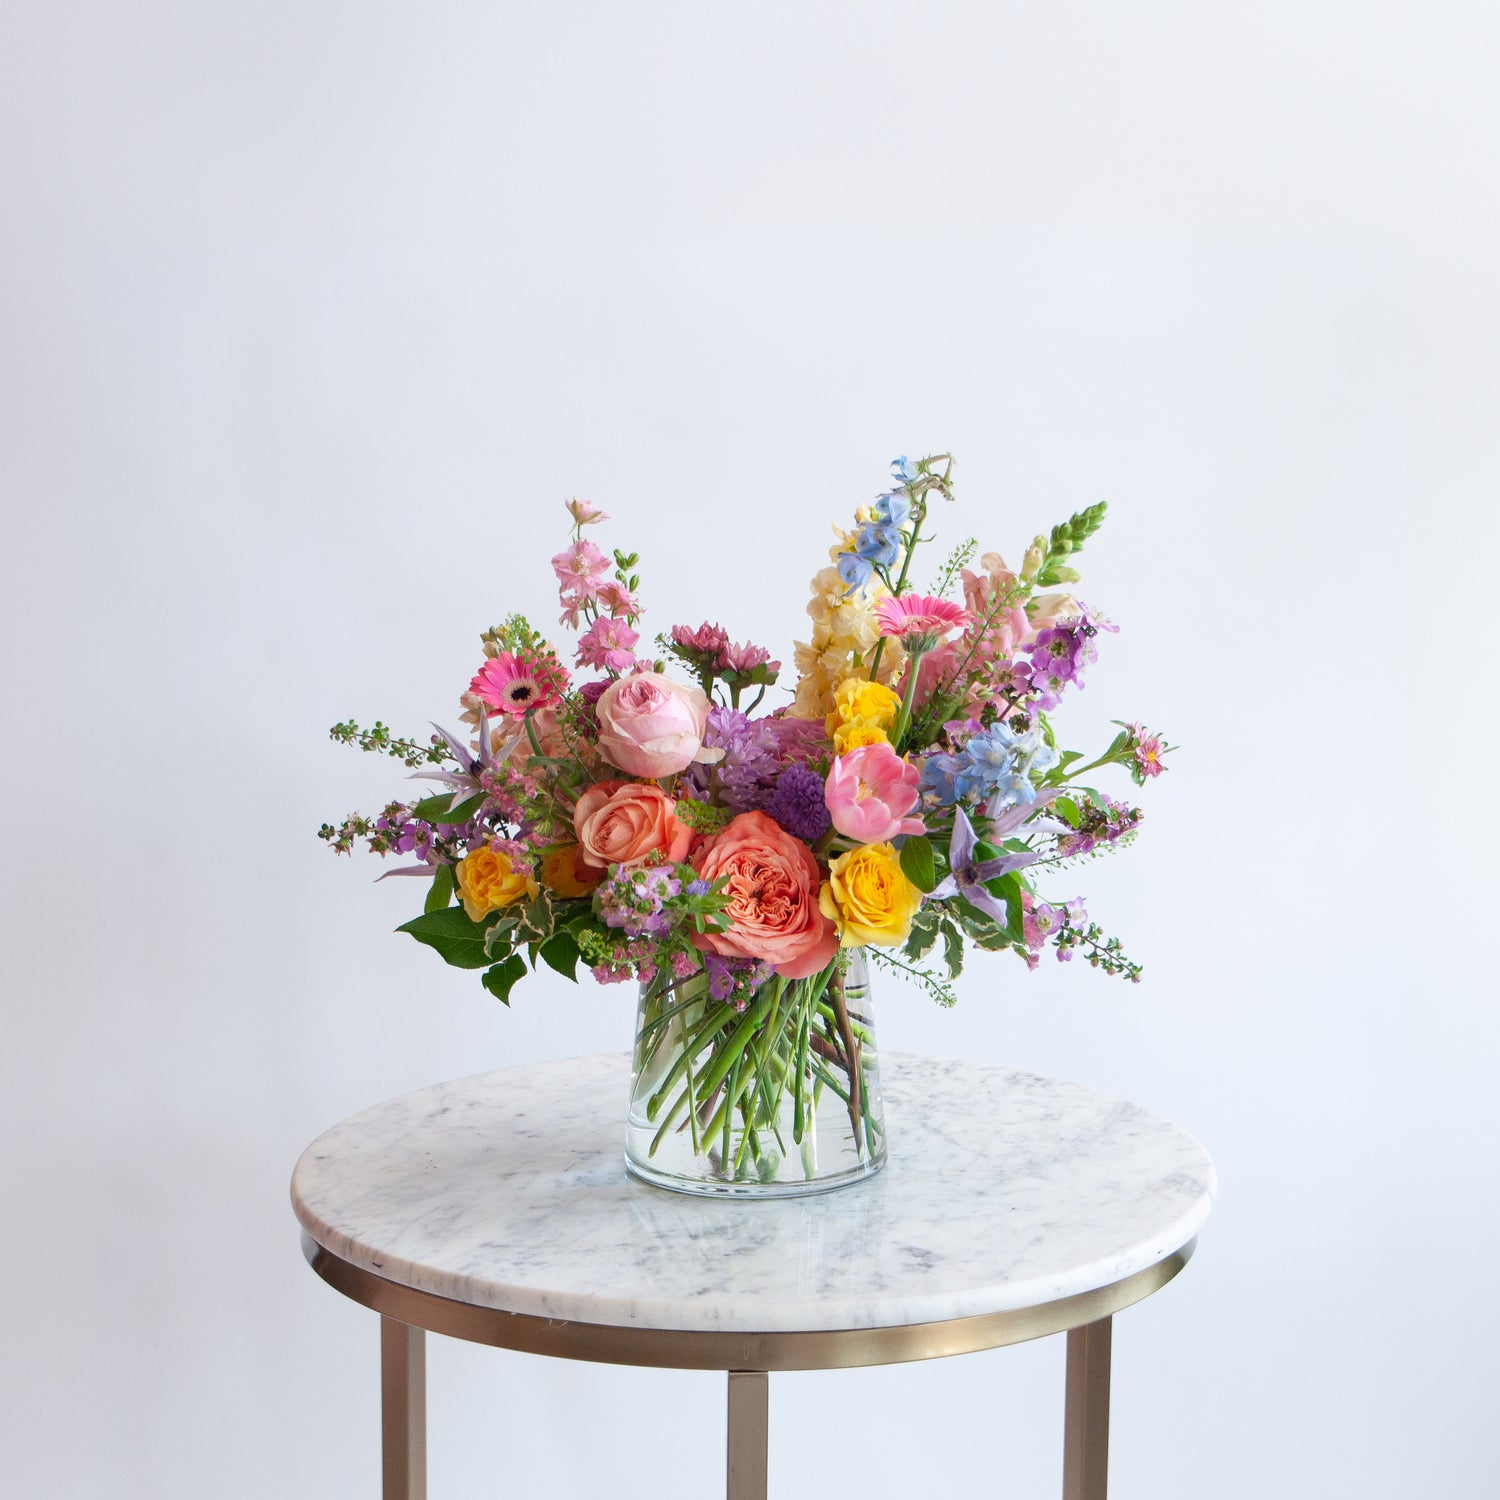 a glass vase with a small flower arrangement sits on a marble table in front of a white backdrop. The flowers are many colors and include roses, tulips, daisies, snapdragon, clematis, and delphinium.